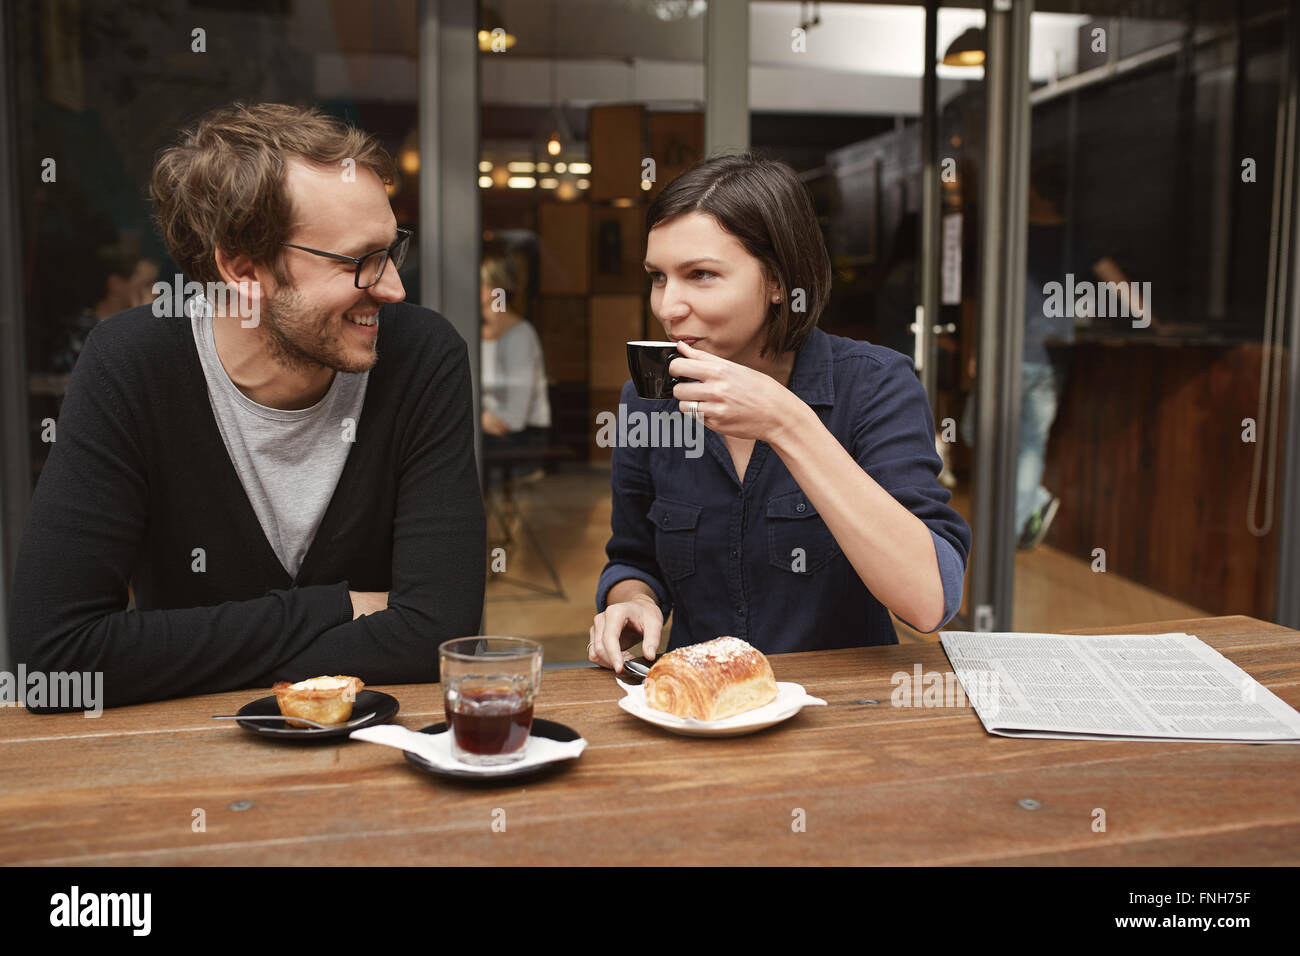 Candid shot of a young couple at outdoor cafe Stock Photo